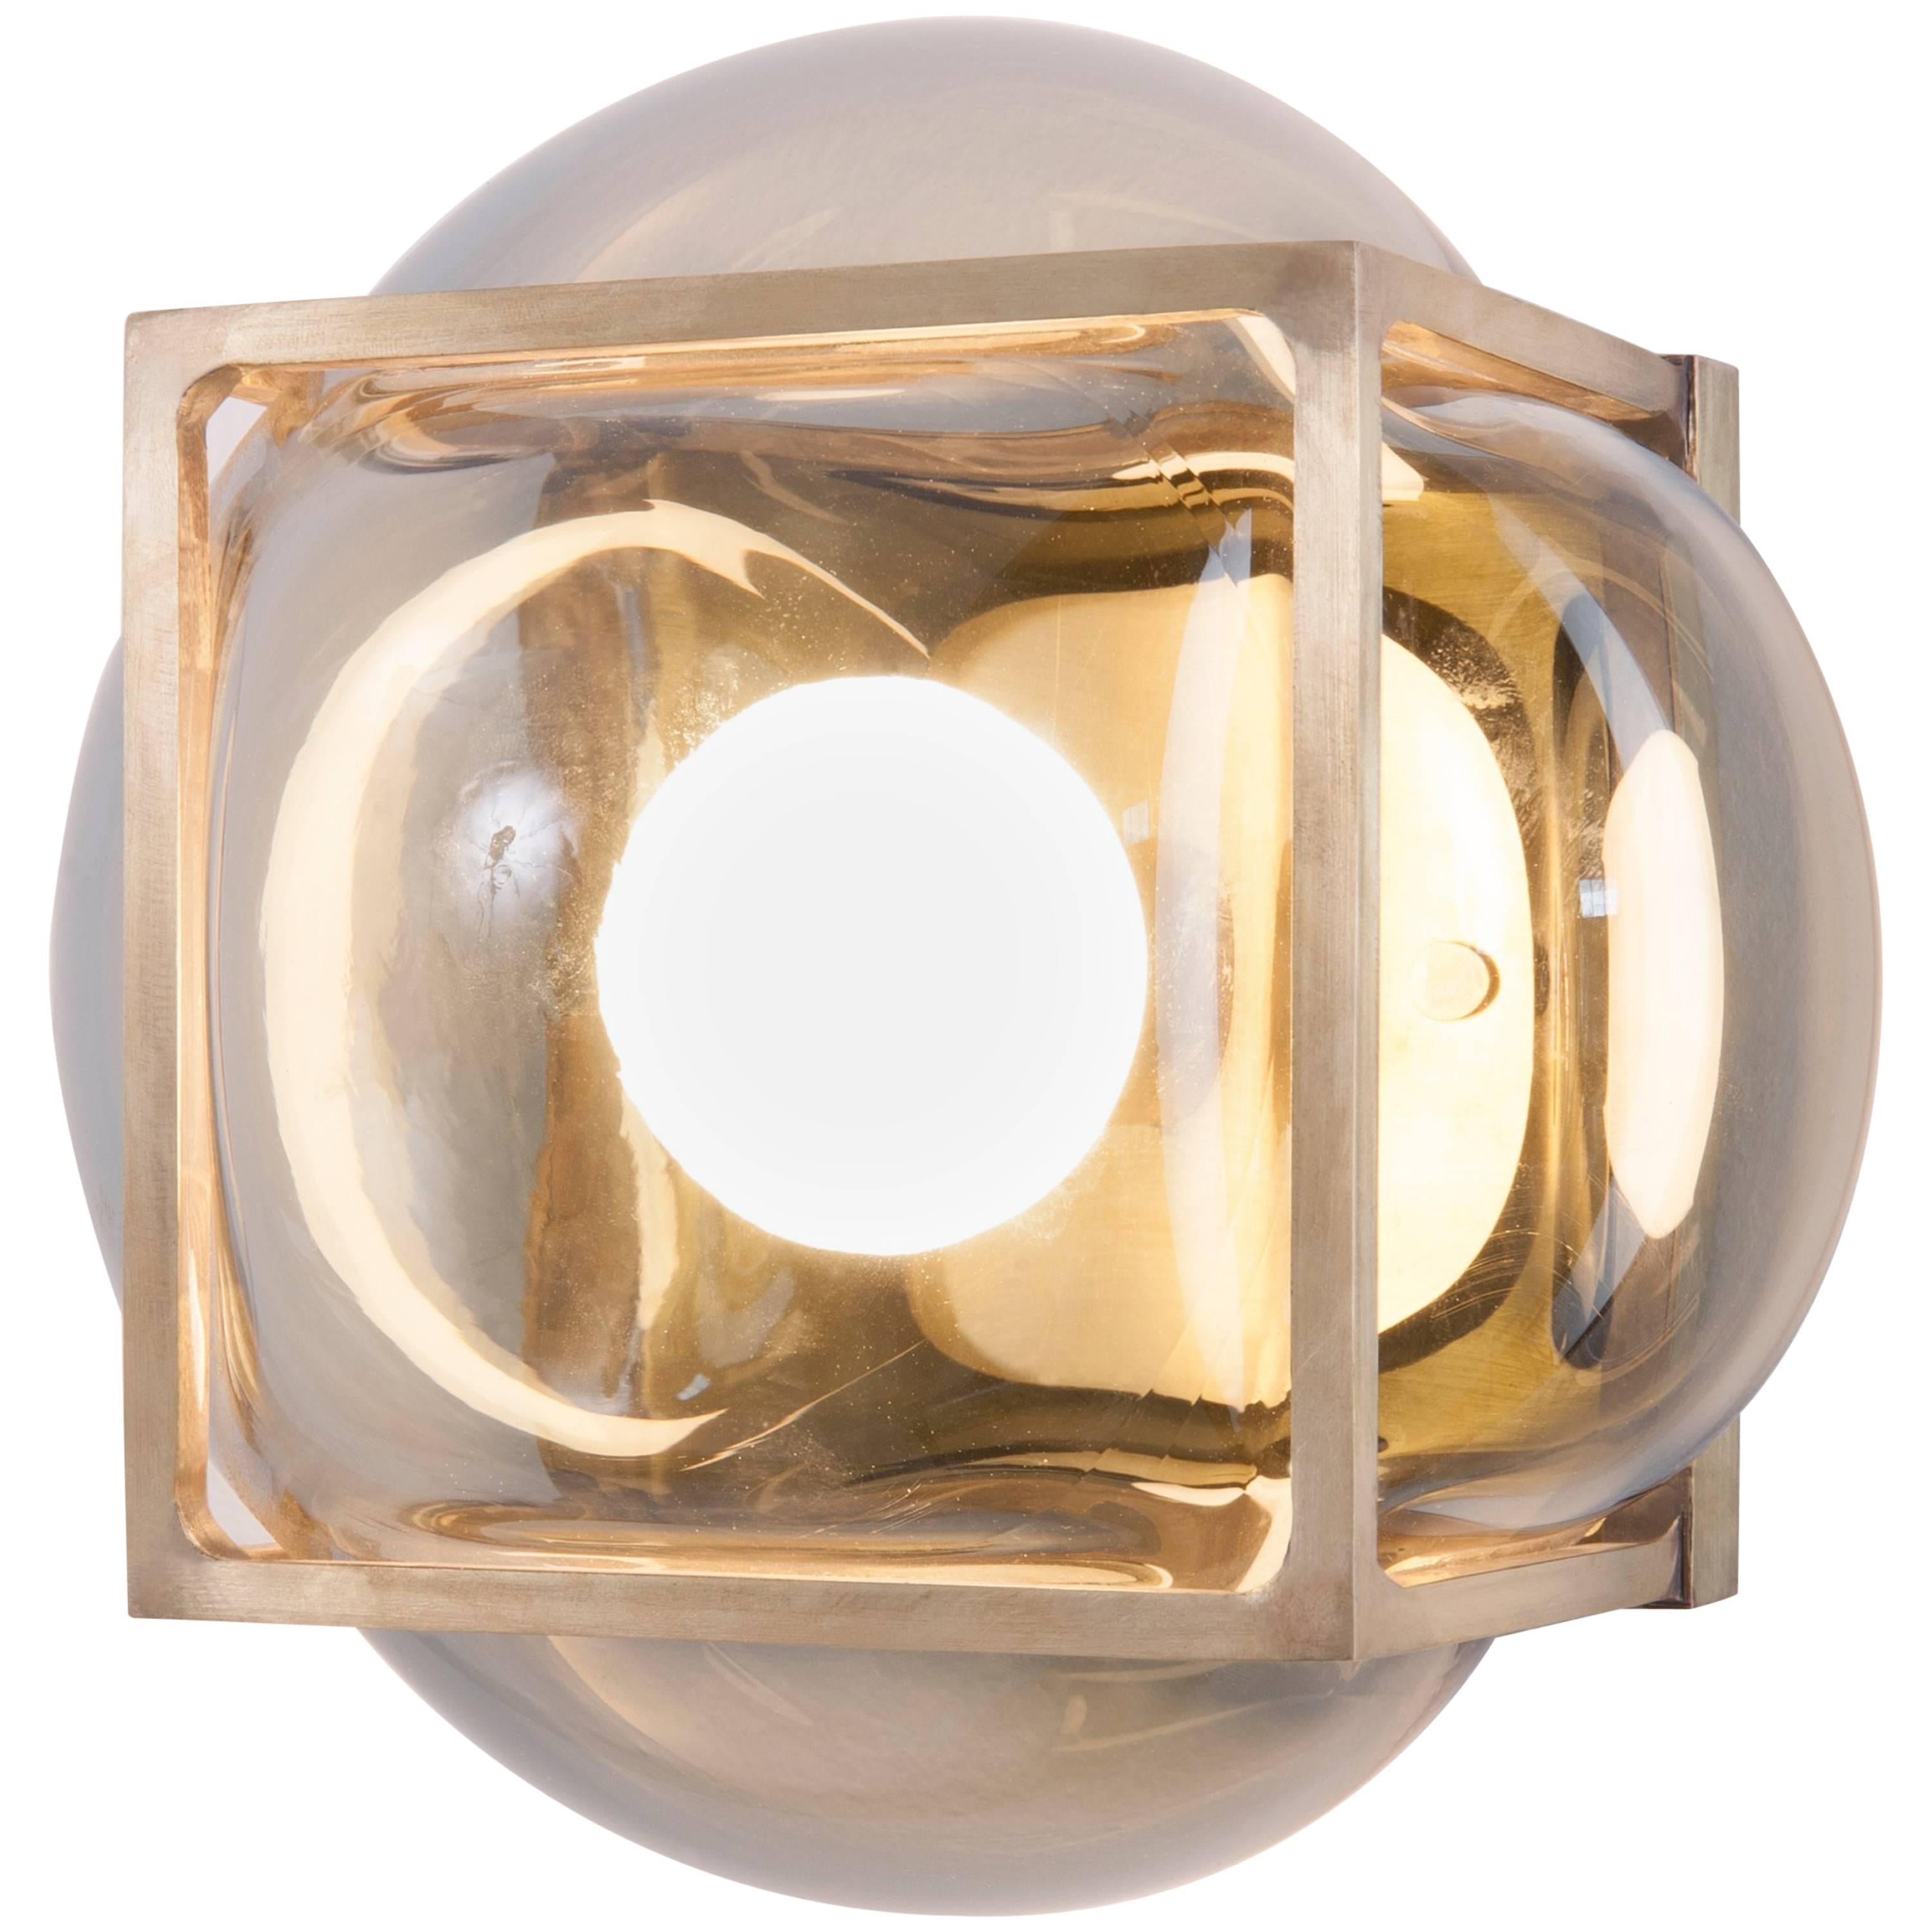 The Bulle can be used as a flushmount, a sconce or a tabletop fixture. The glass is hand blown into the solid brass frame. The hand blowed glass is available in either clear grey or opal white. Finish options for the metal frame are either blackened